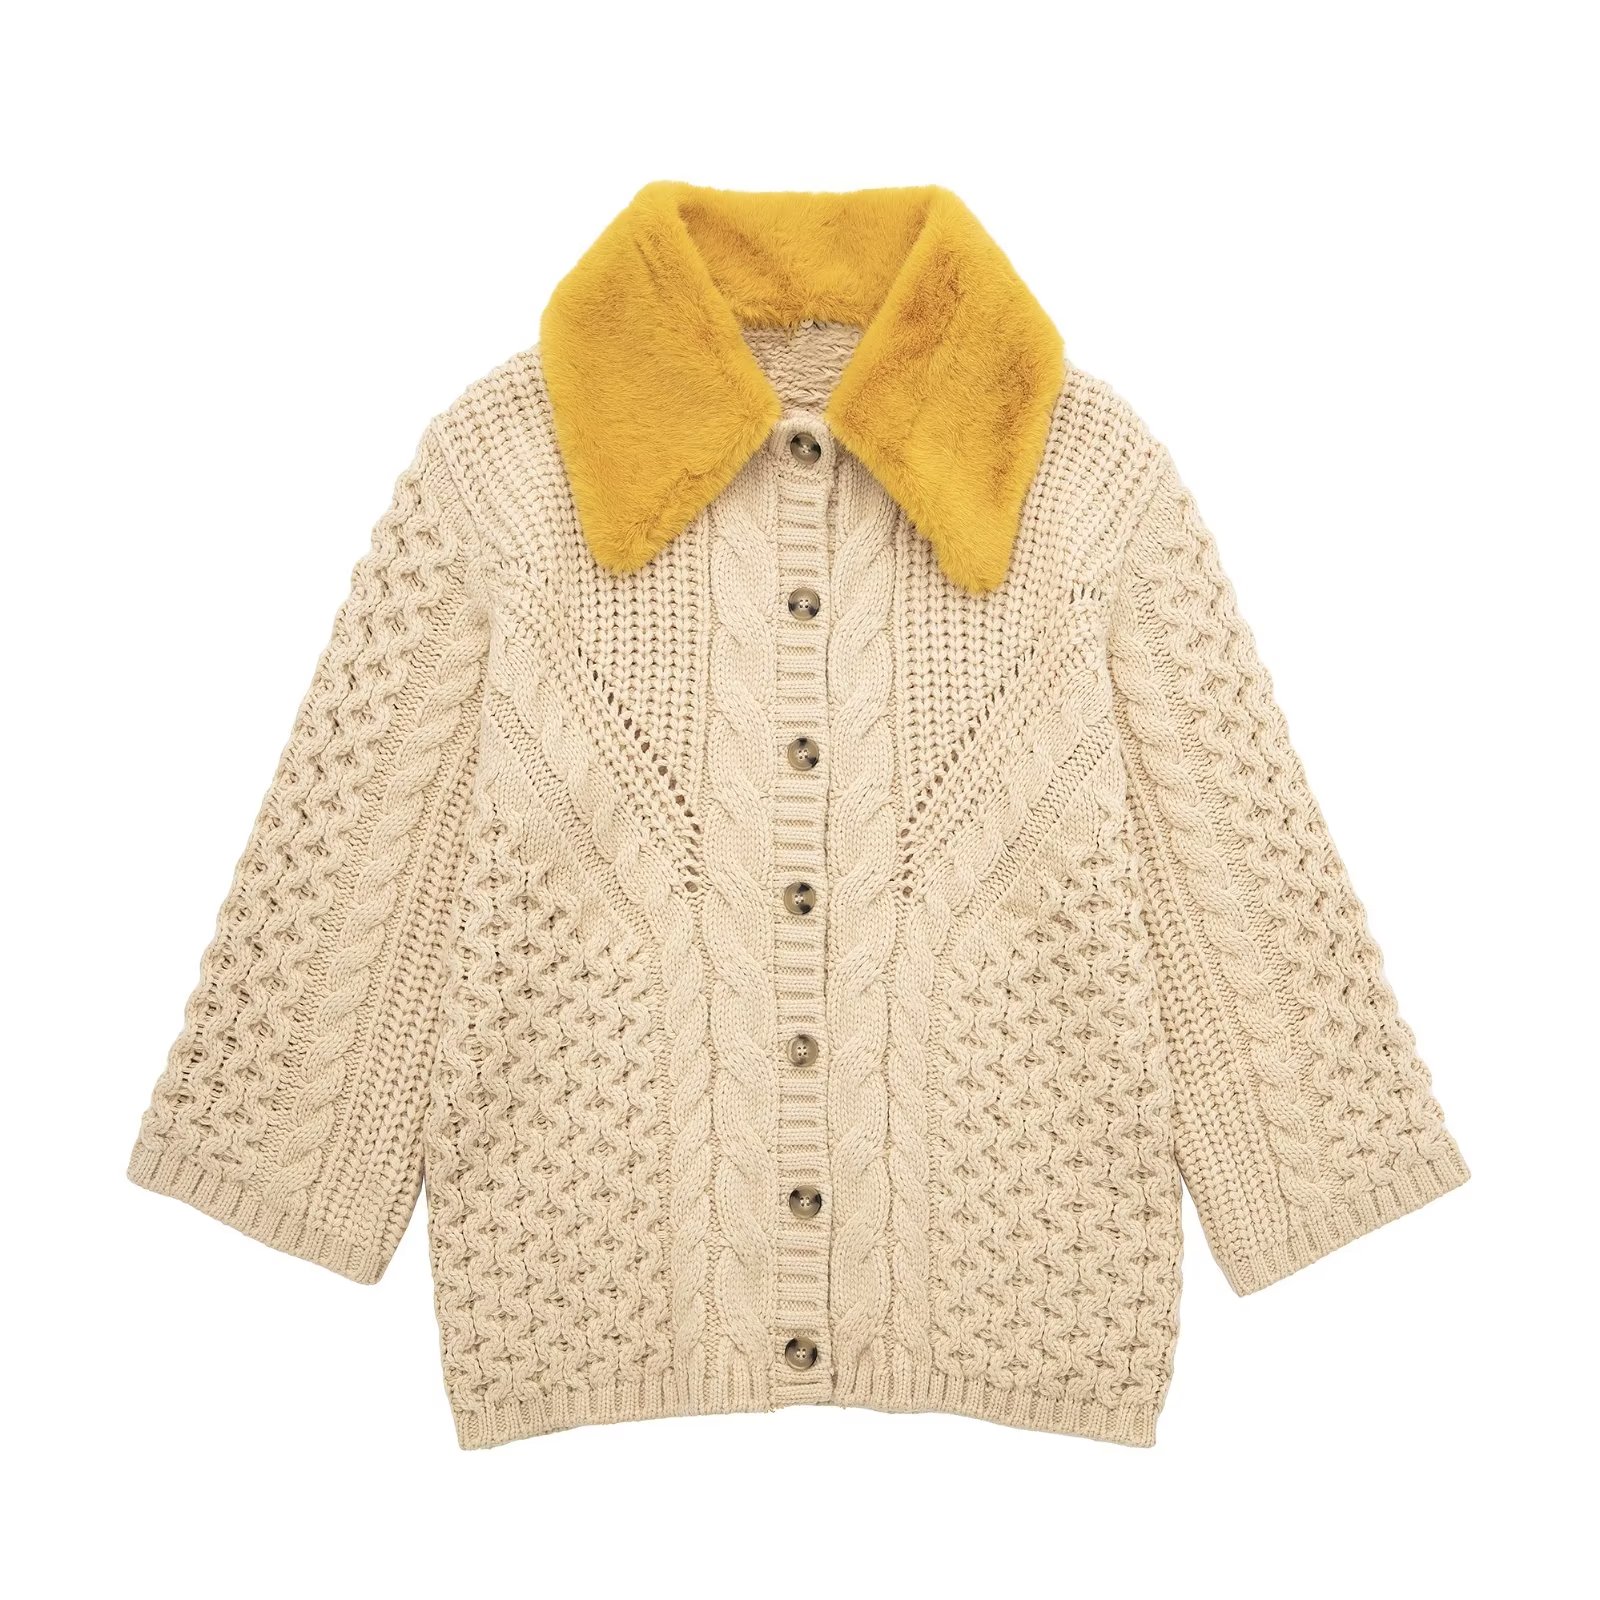 Knitted Sweater Cardigan - Sweaters - Uniqistic.com